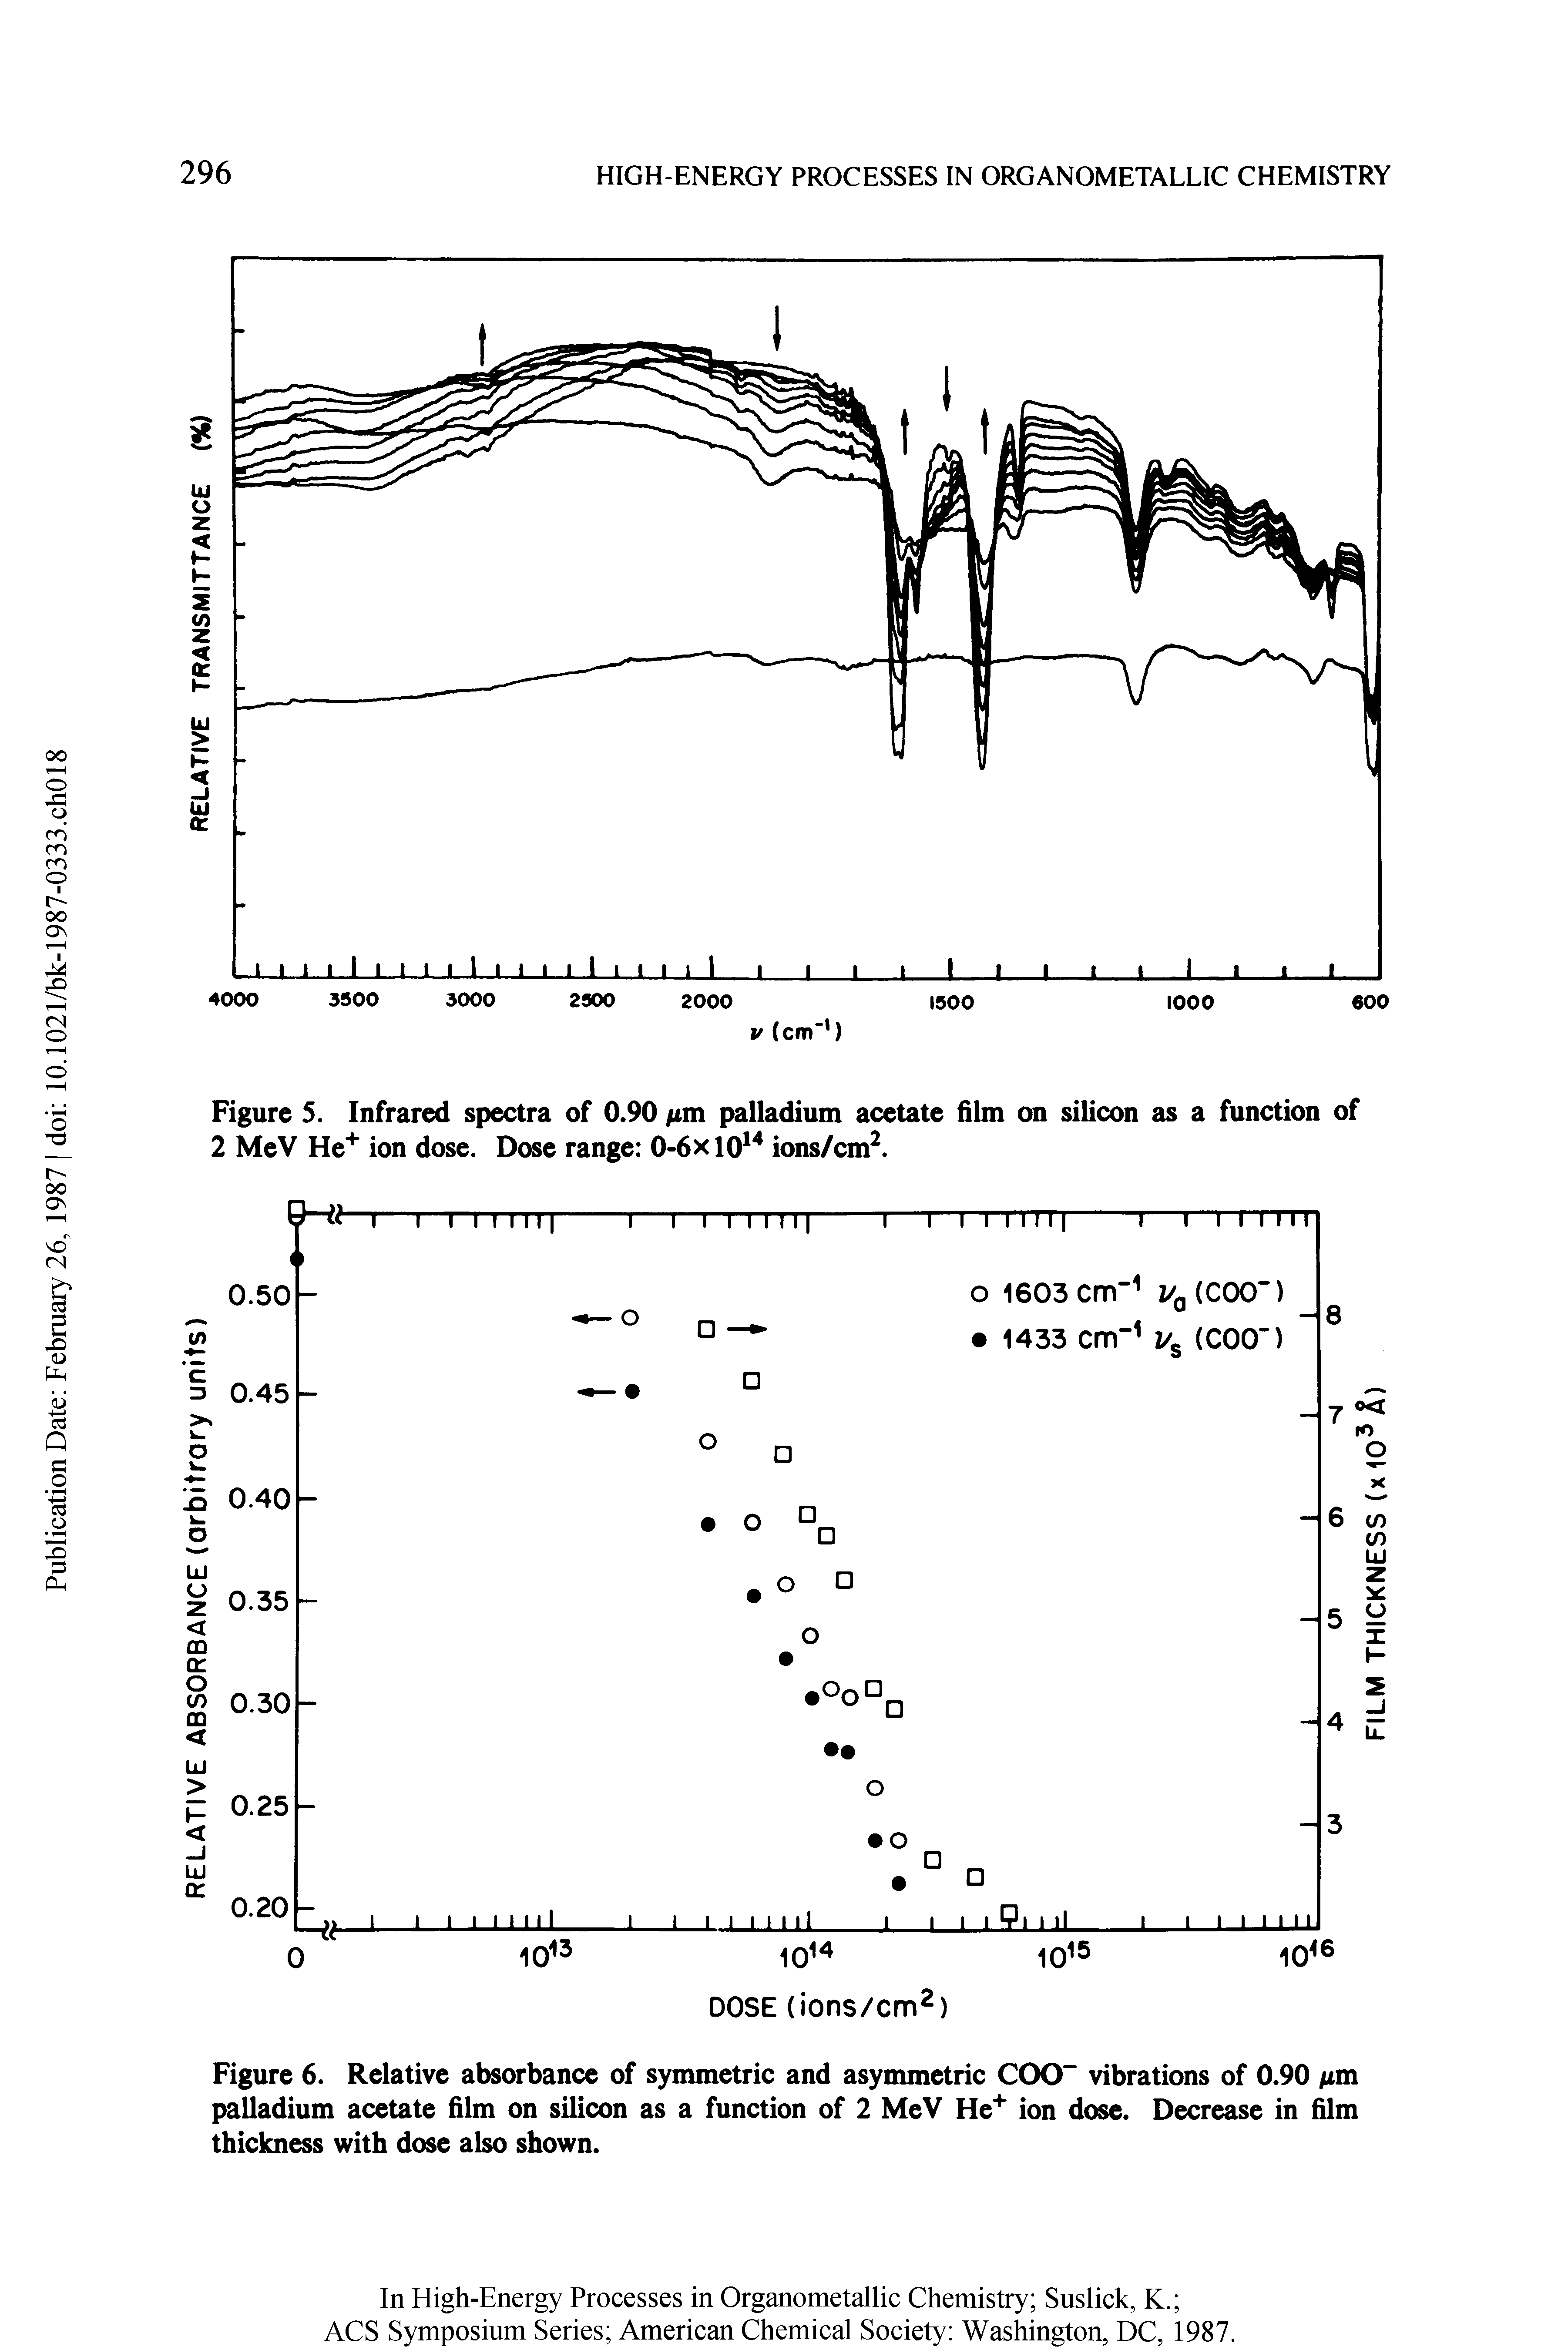 Figure 6. Relative absorbance of symmetric and asymmetric COO vibrations of 0.90 fim palladium acetate film on silicon as a function of 2 MeV He+ ion dose. Decrease in film thickness with dose also shown.